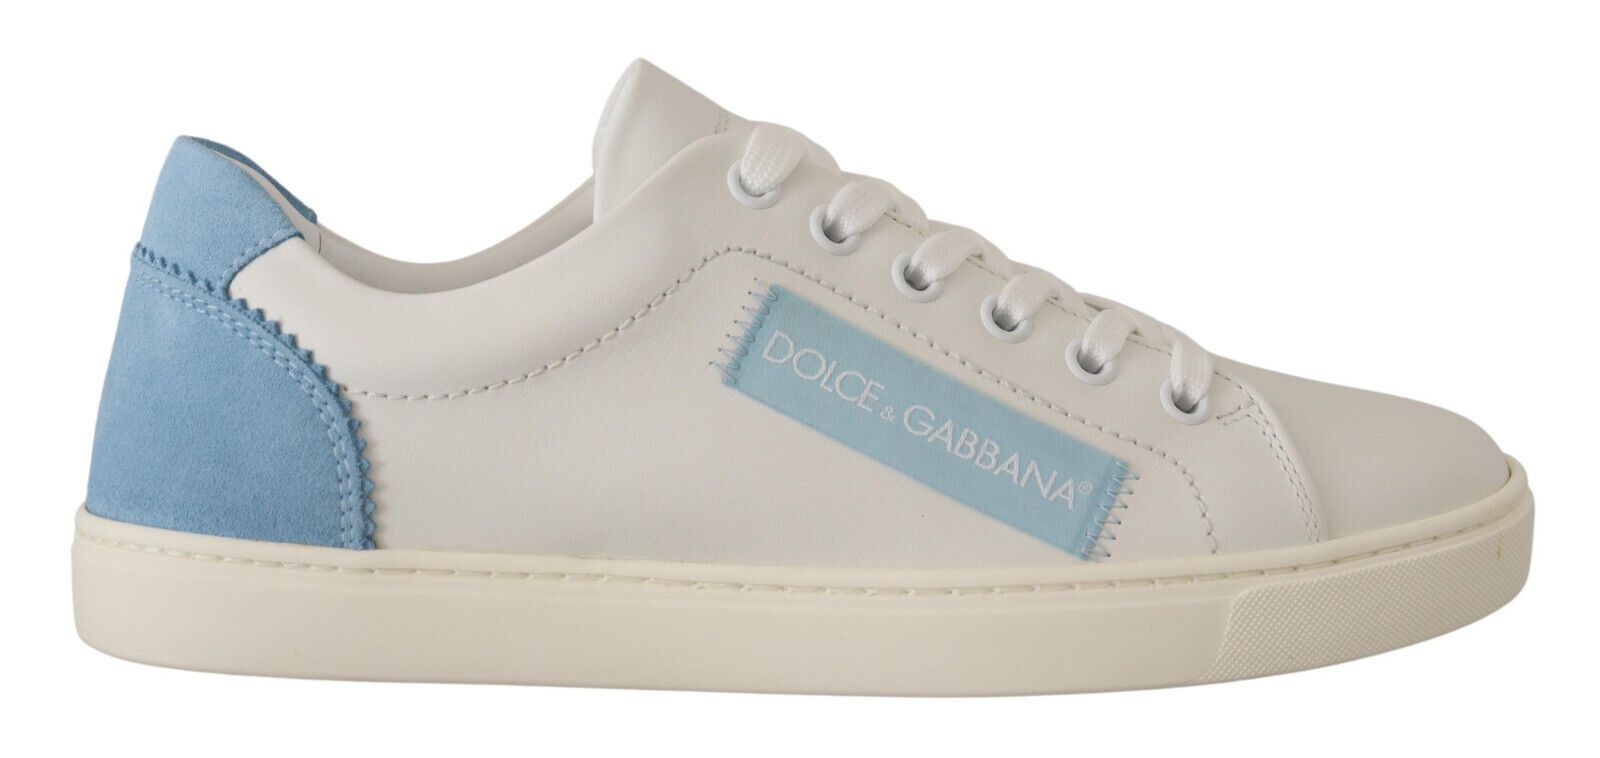 White Blue Leather Low Top Sneakers Shoes